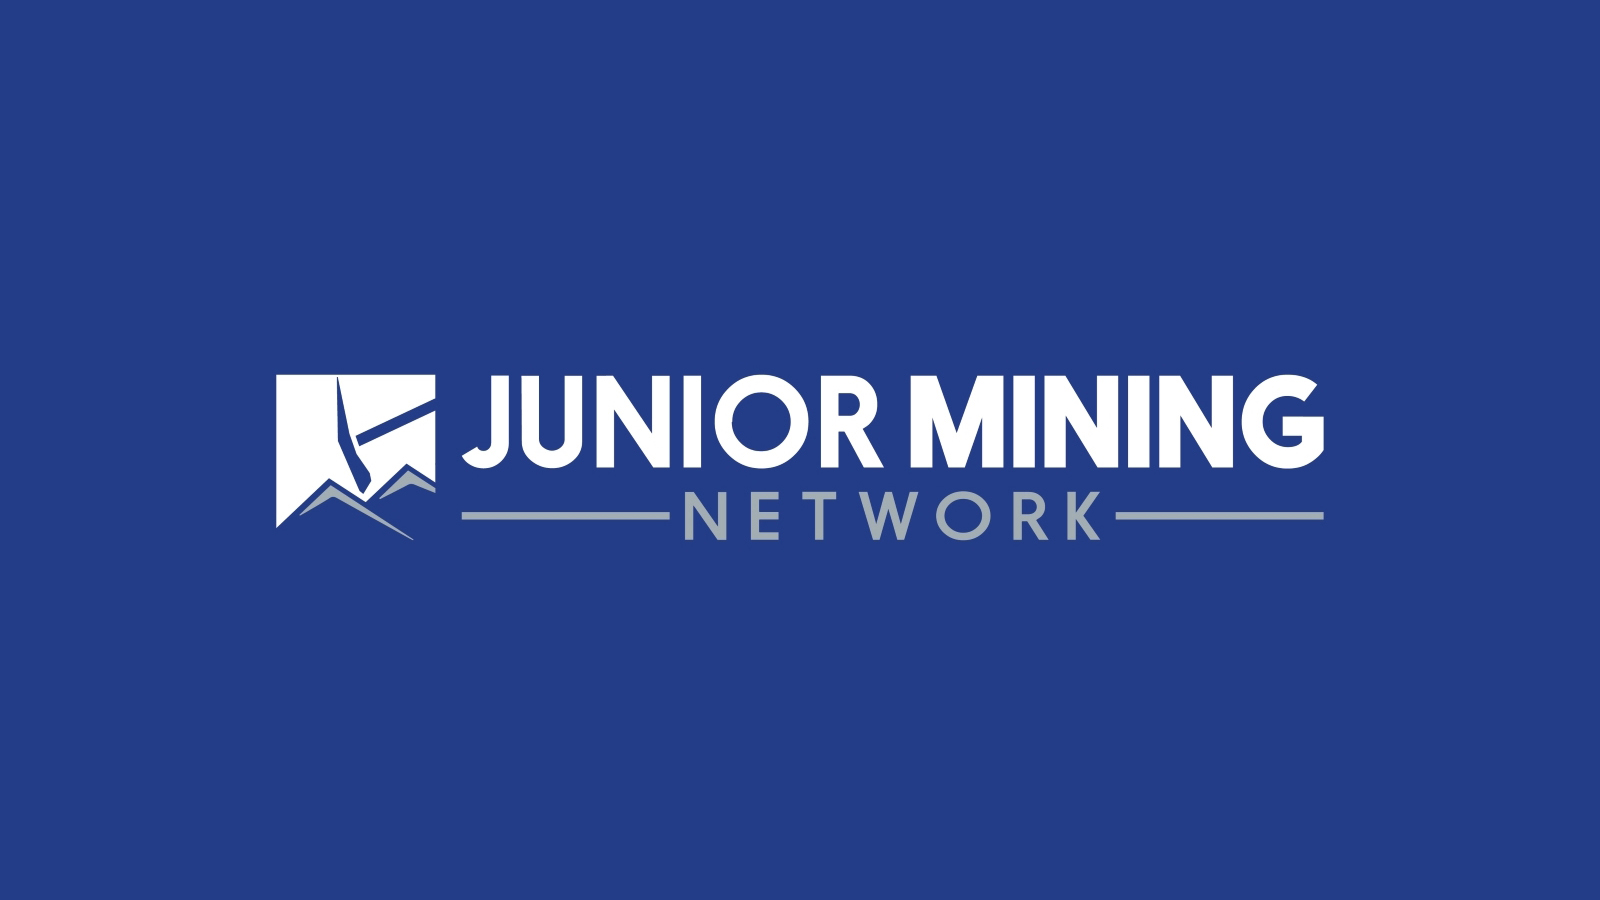 Great Panther Mining Limited Logo (CNW Group/Great Panther Mining Limited)